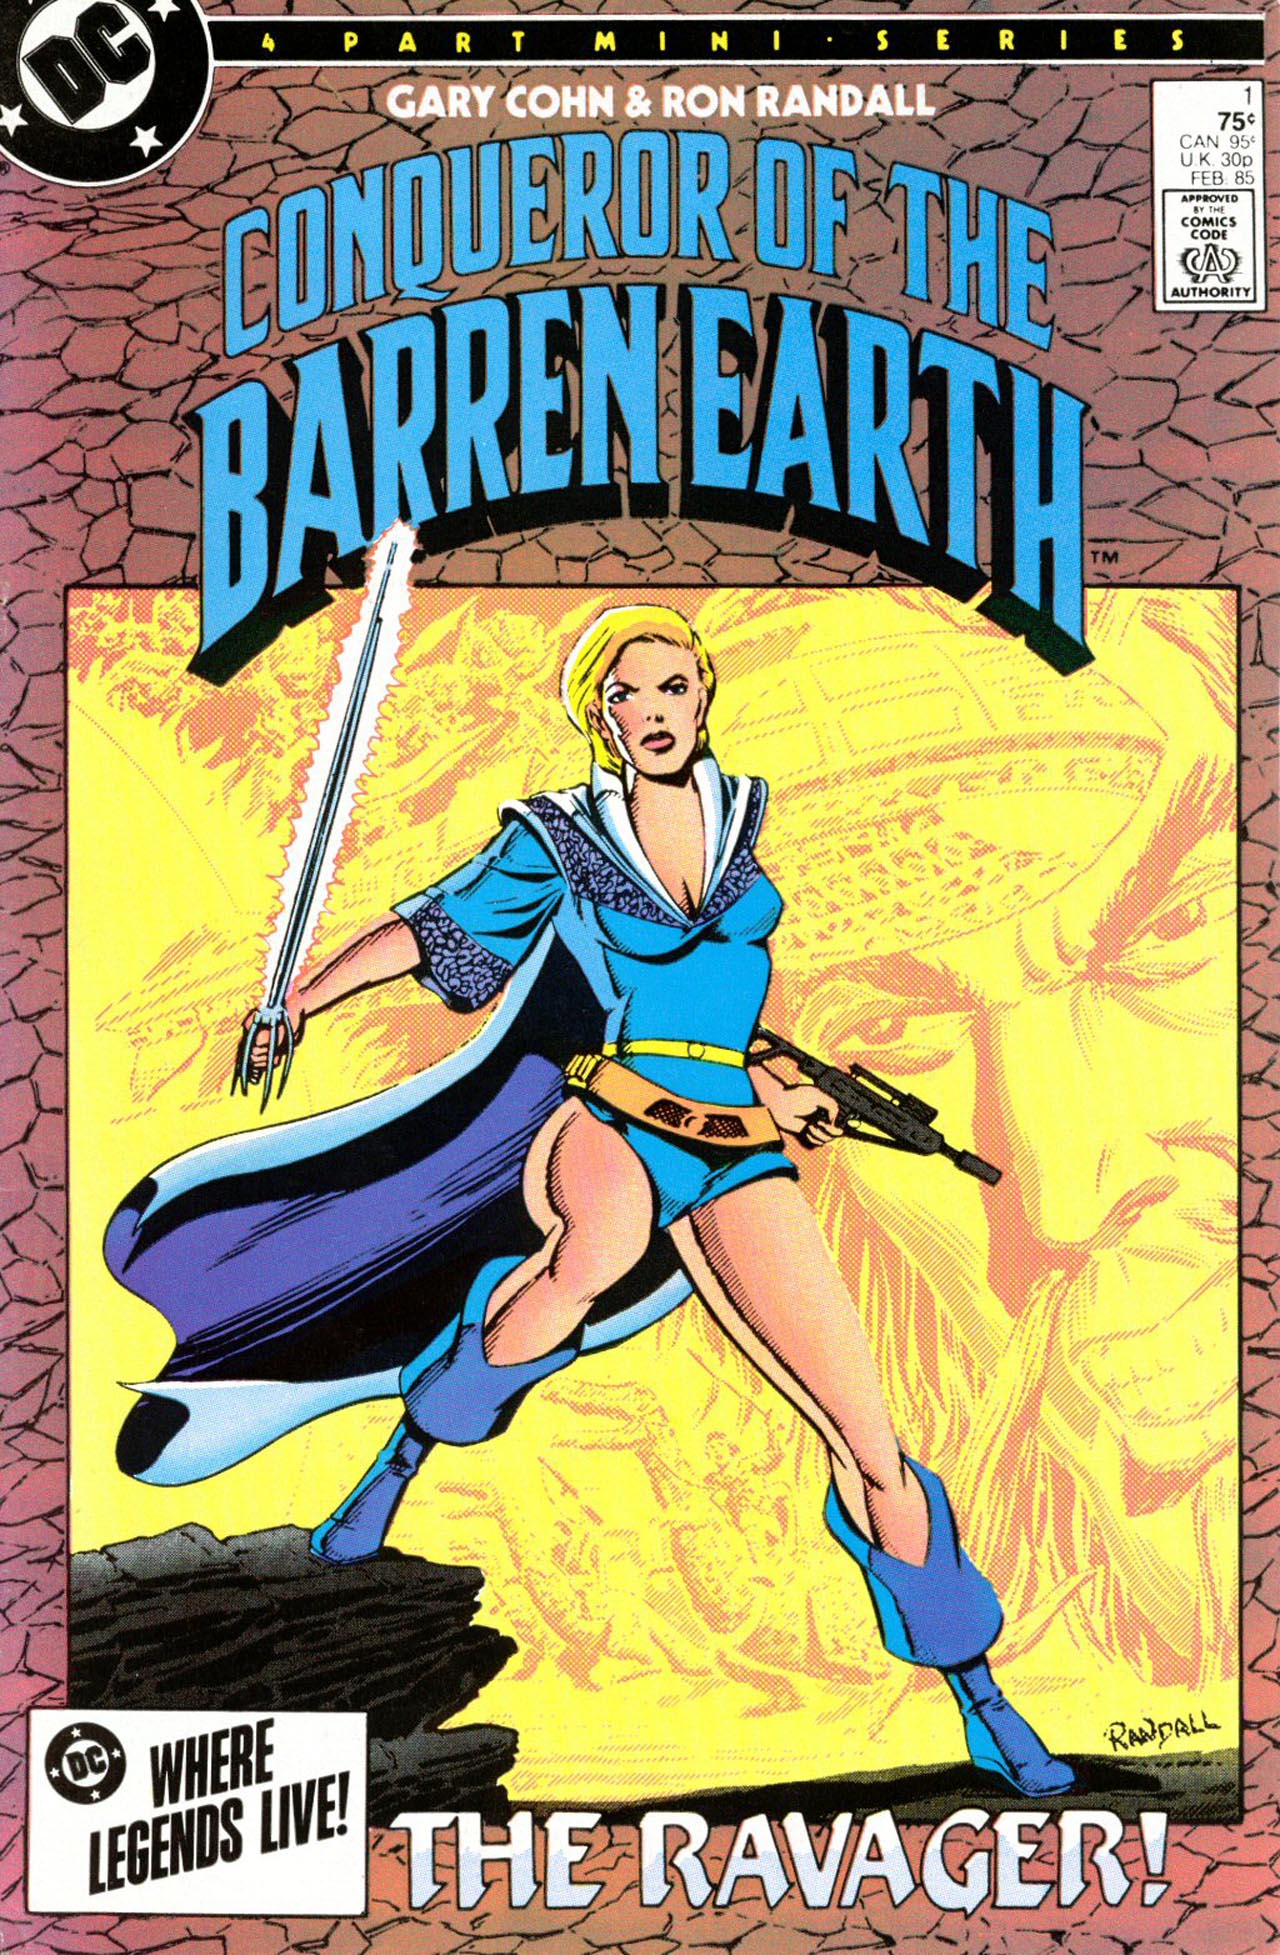 Read online Conqueror of the Barren Earth comic -  Issue #1 - 1